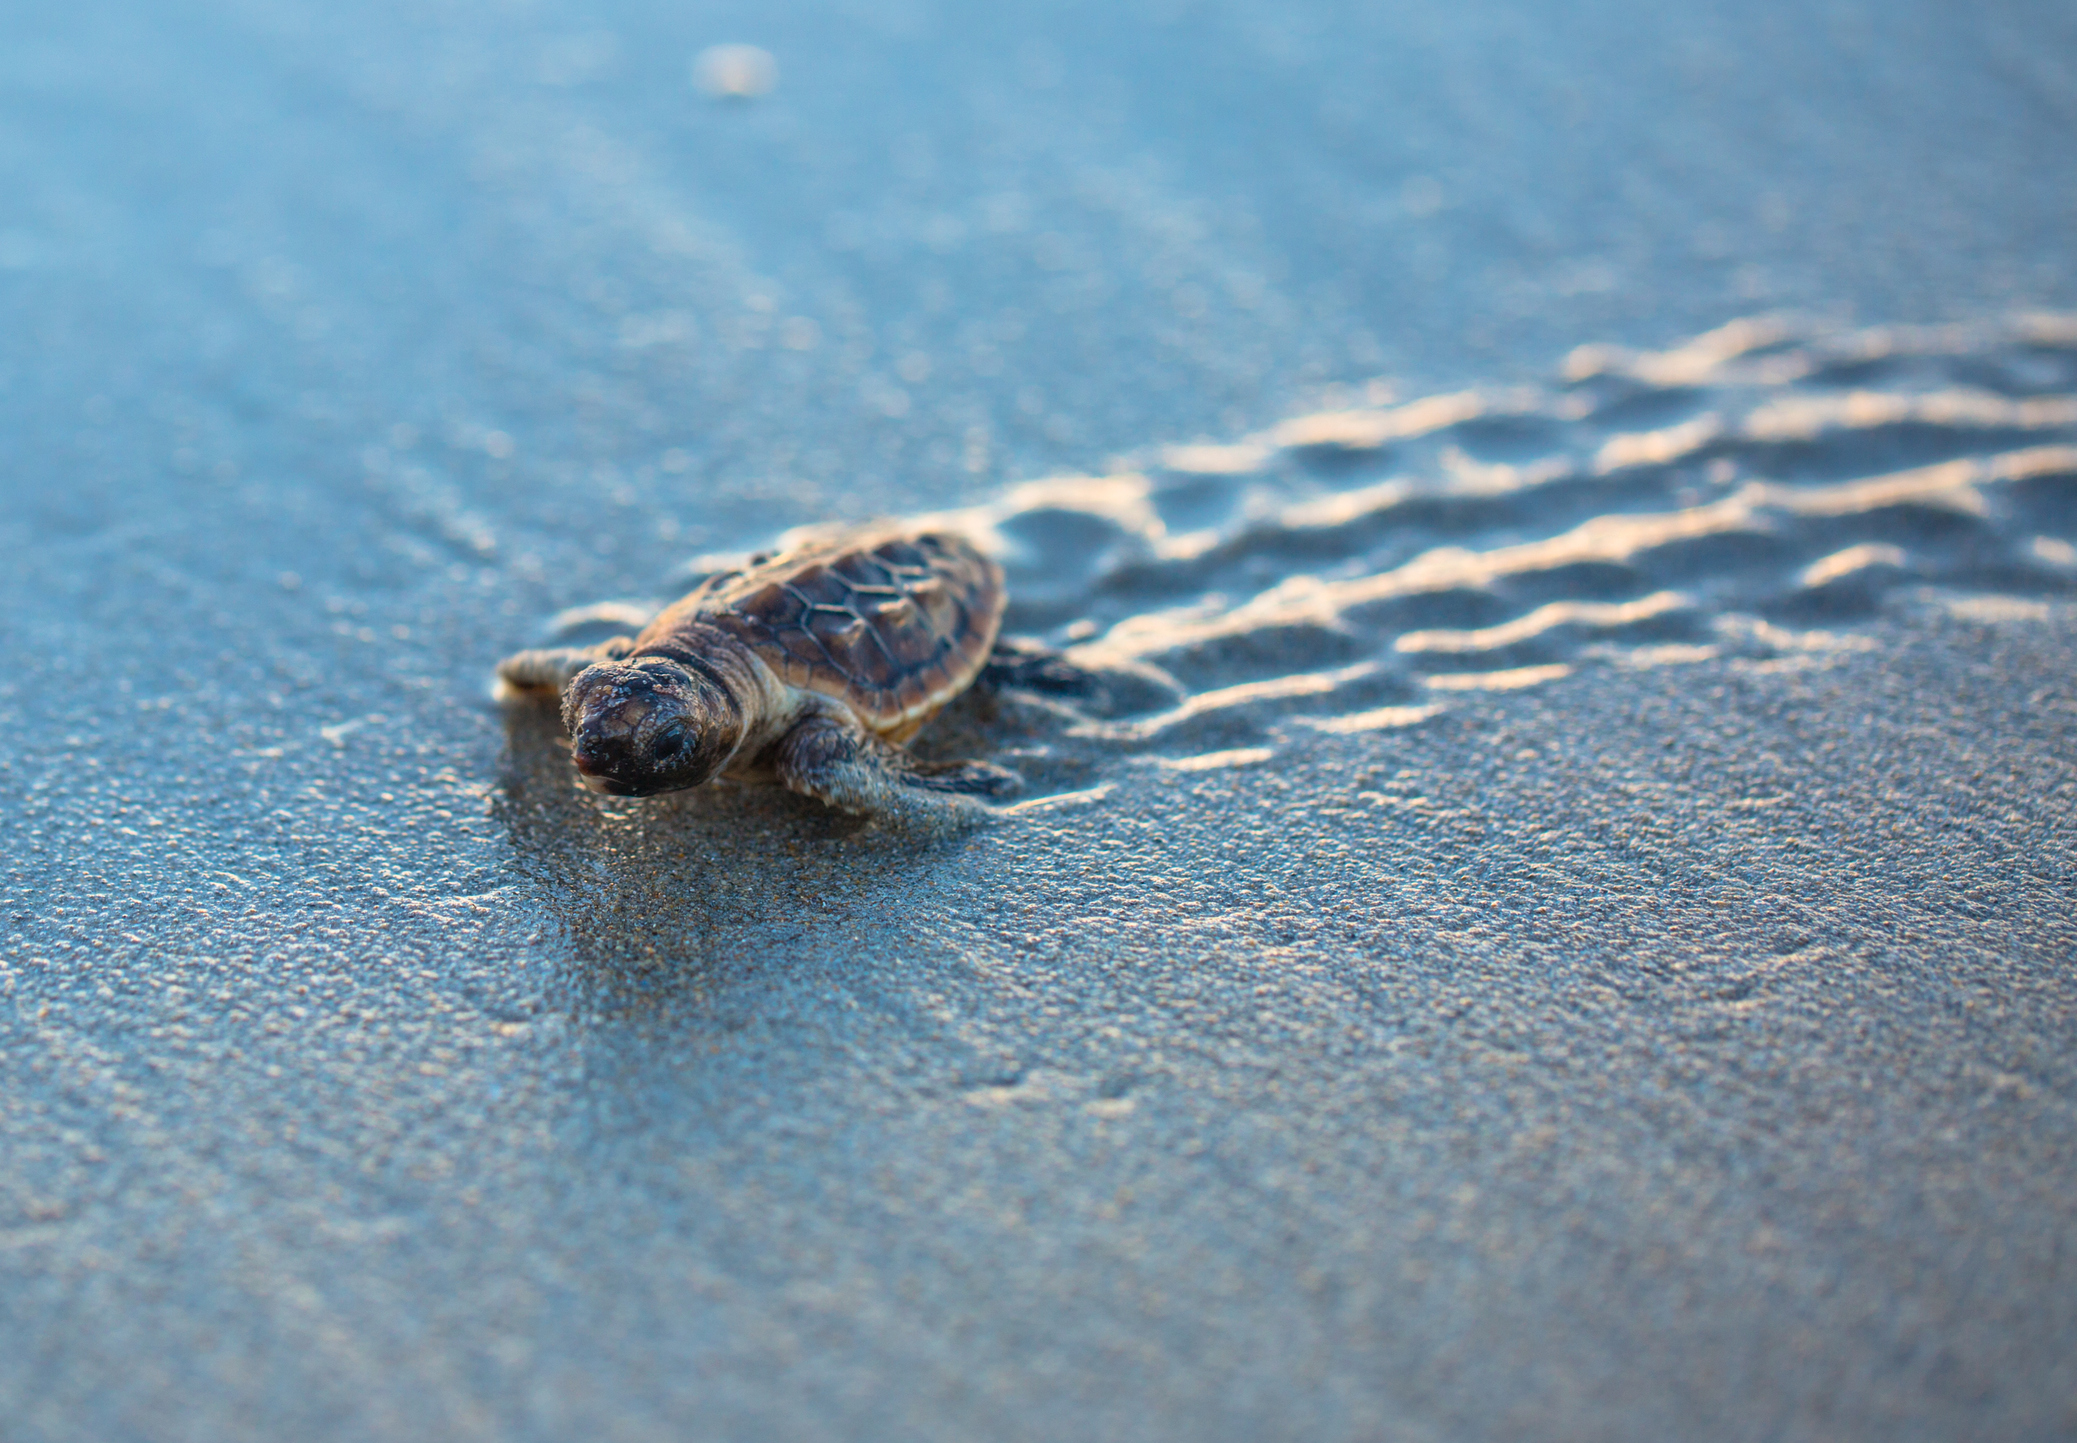 Tranquility and turtles, who could want more? Loggerhead Sea Turtles are a Lowcountry must-see!  